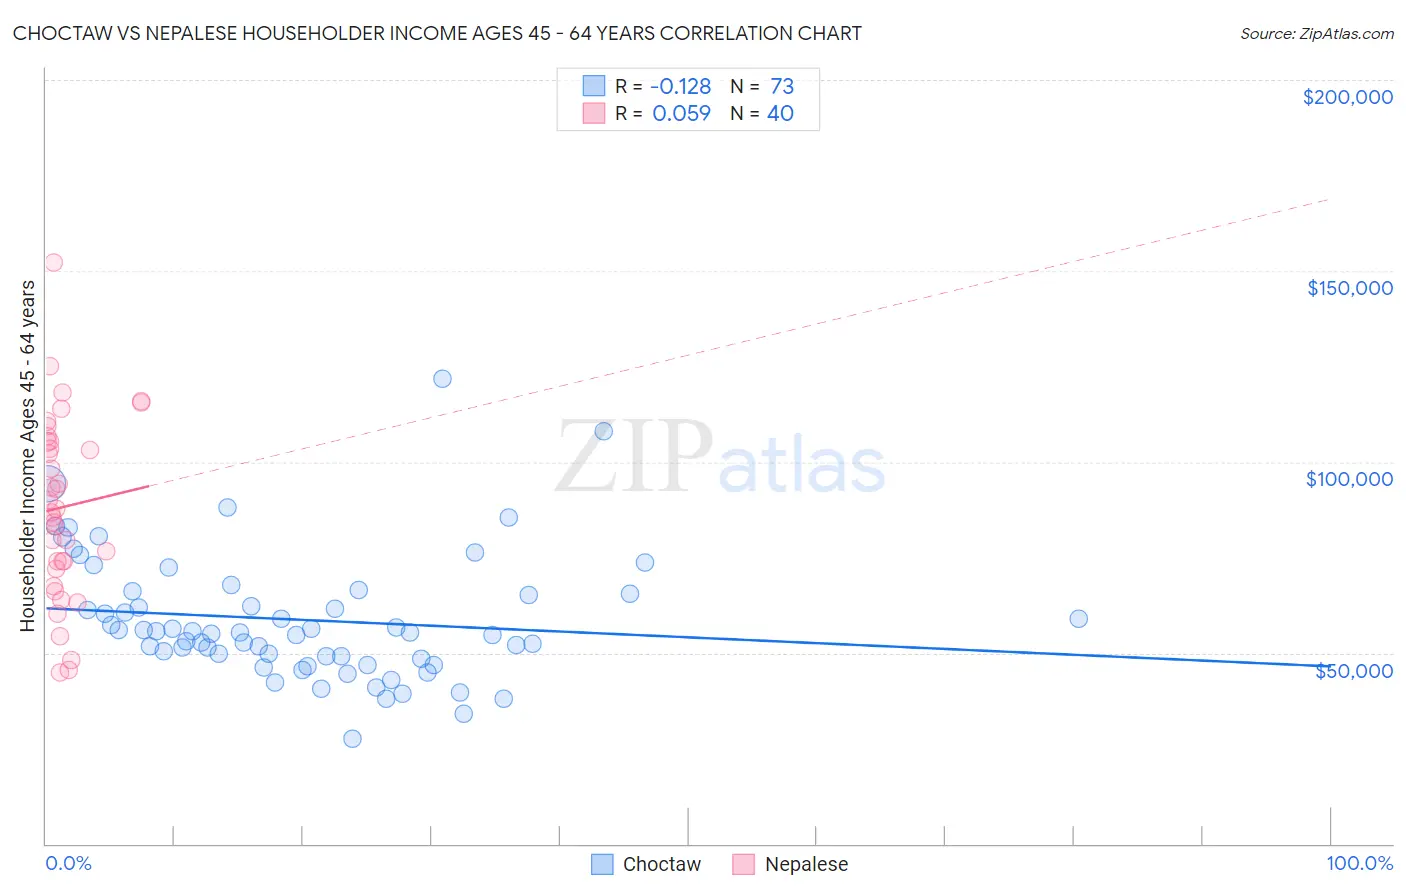 Choctaw vs Nepalese Householder Income Ages 45 - 64 years